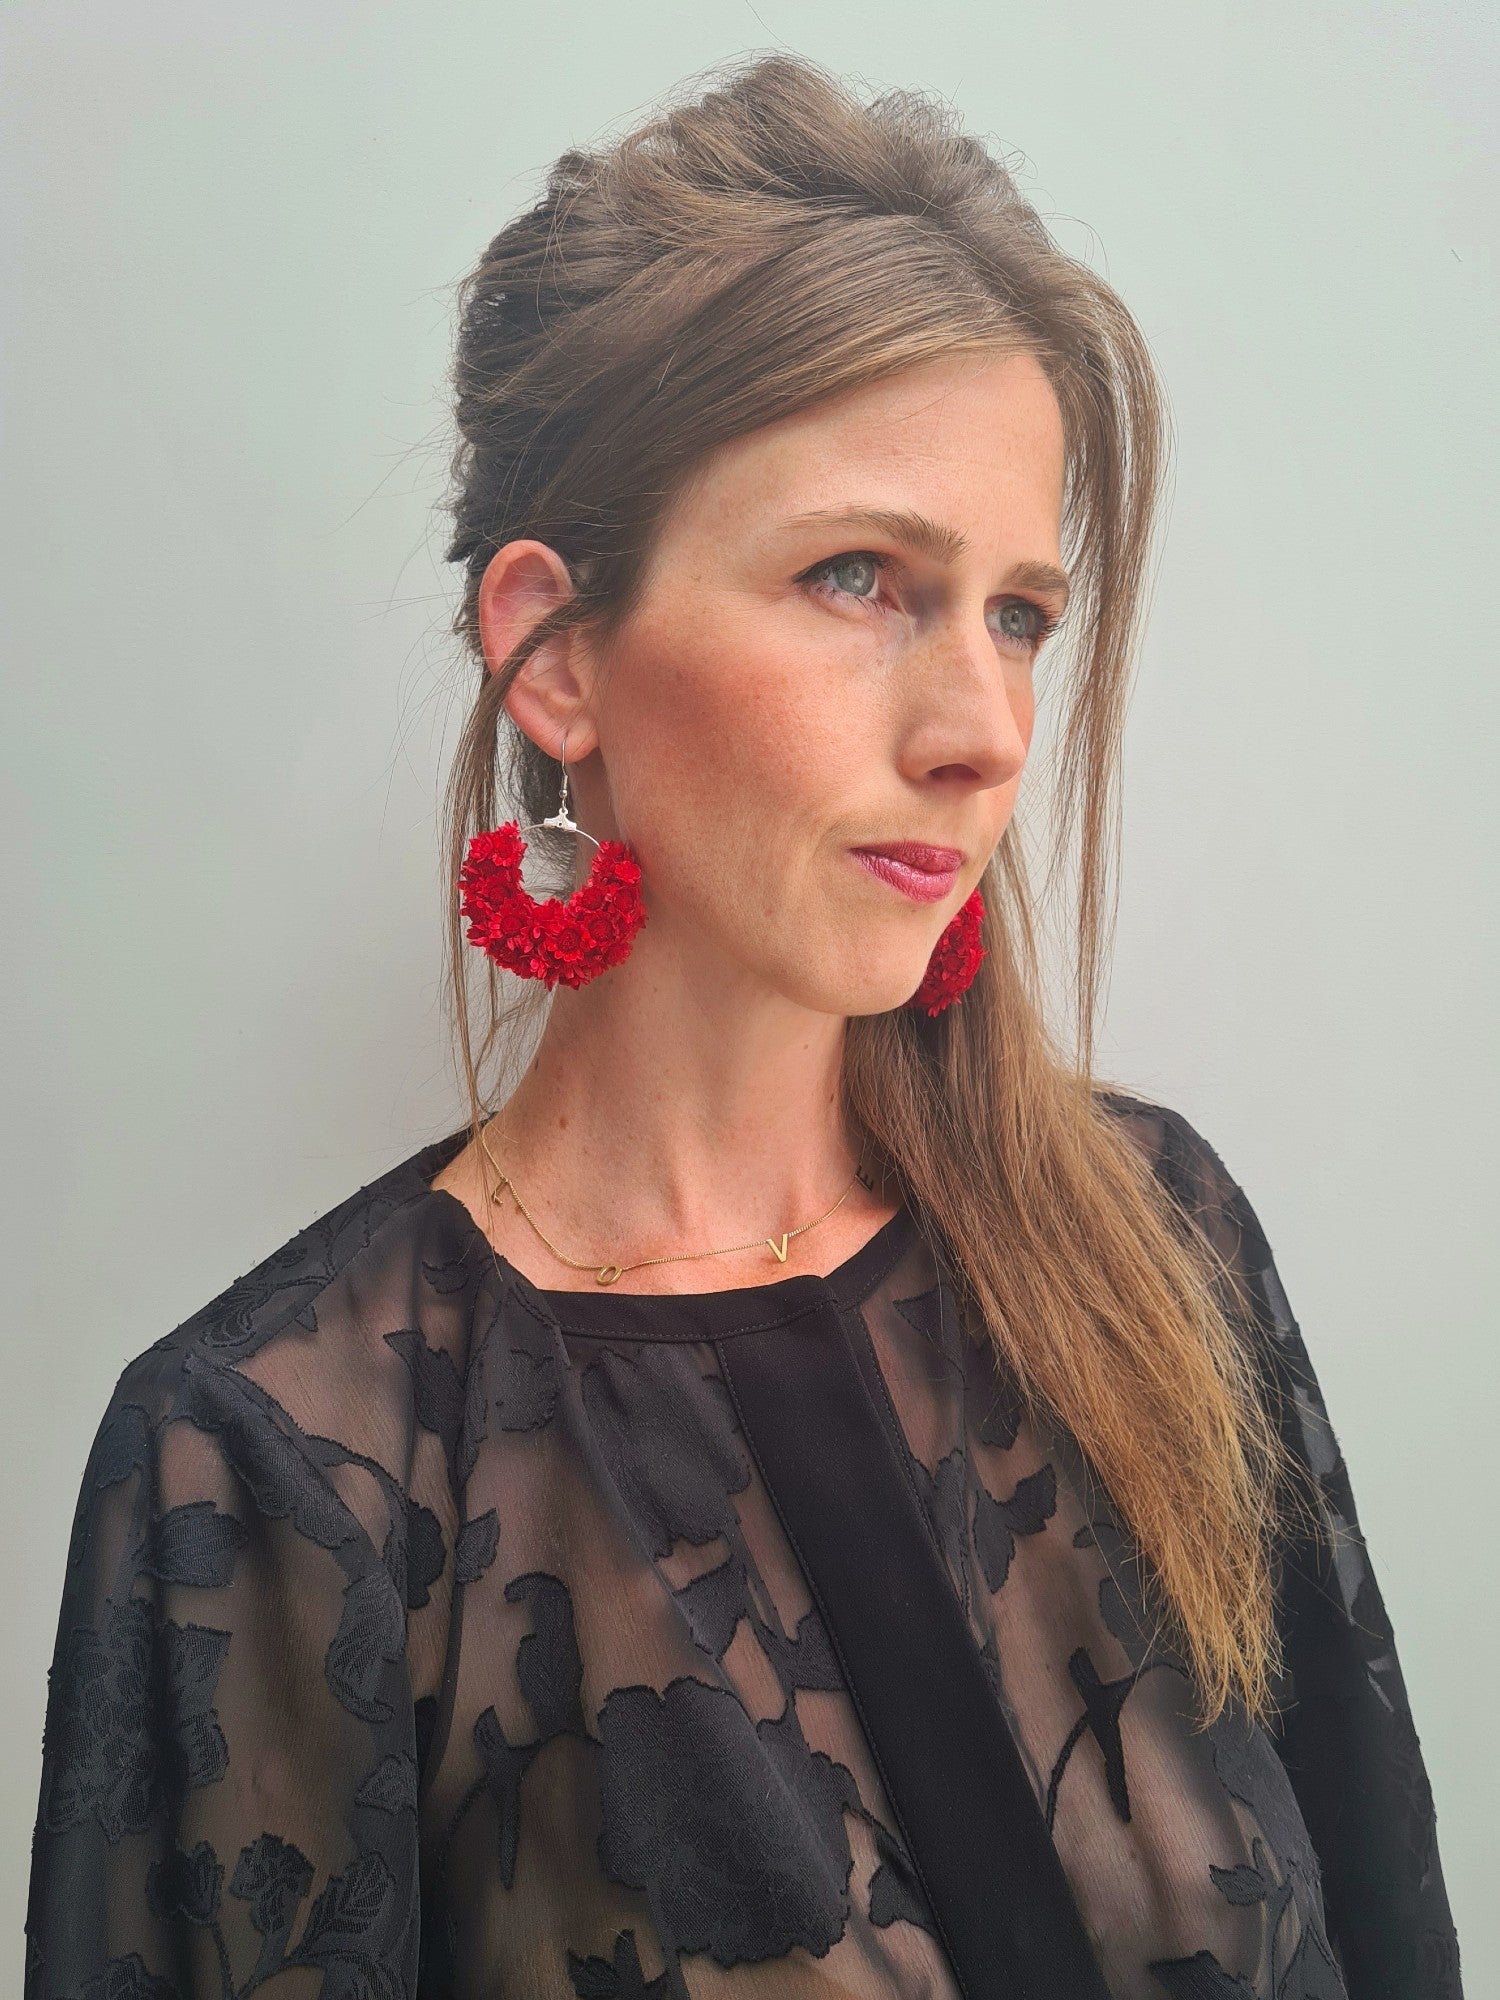 Over the Moon RED - earrings